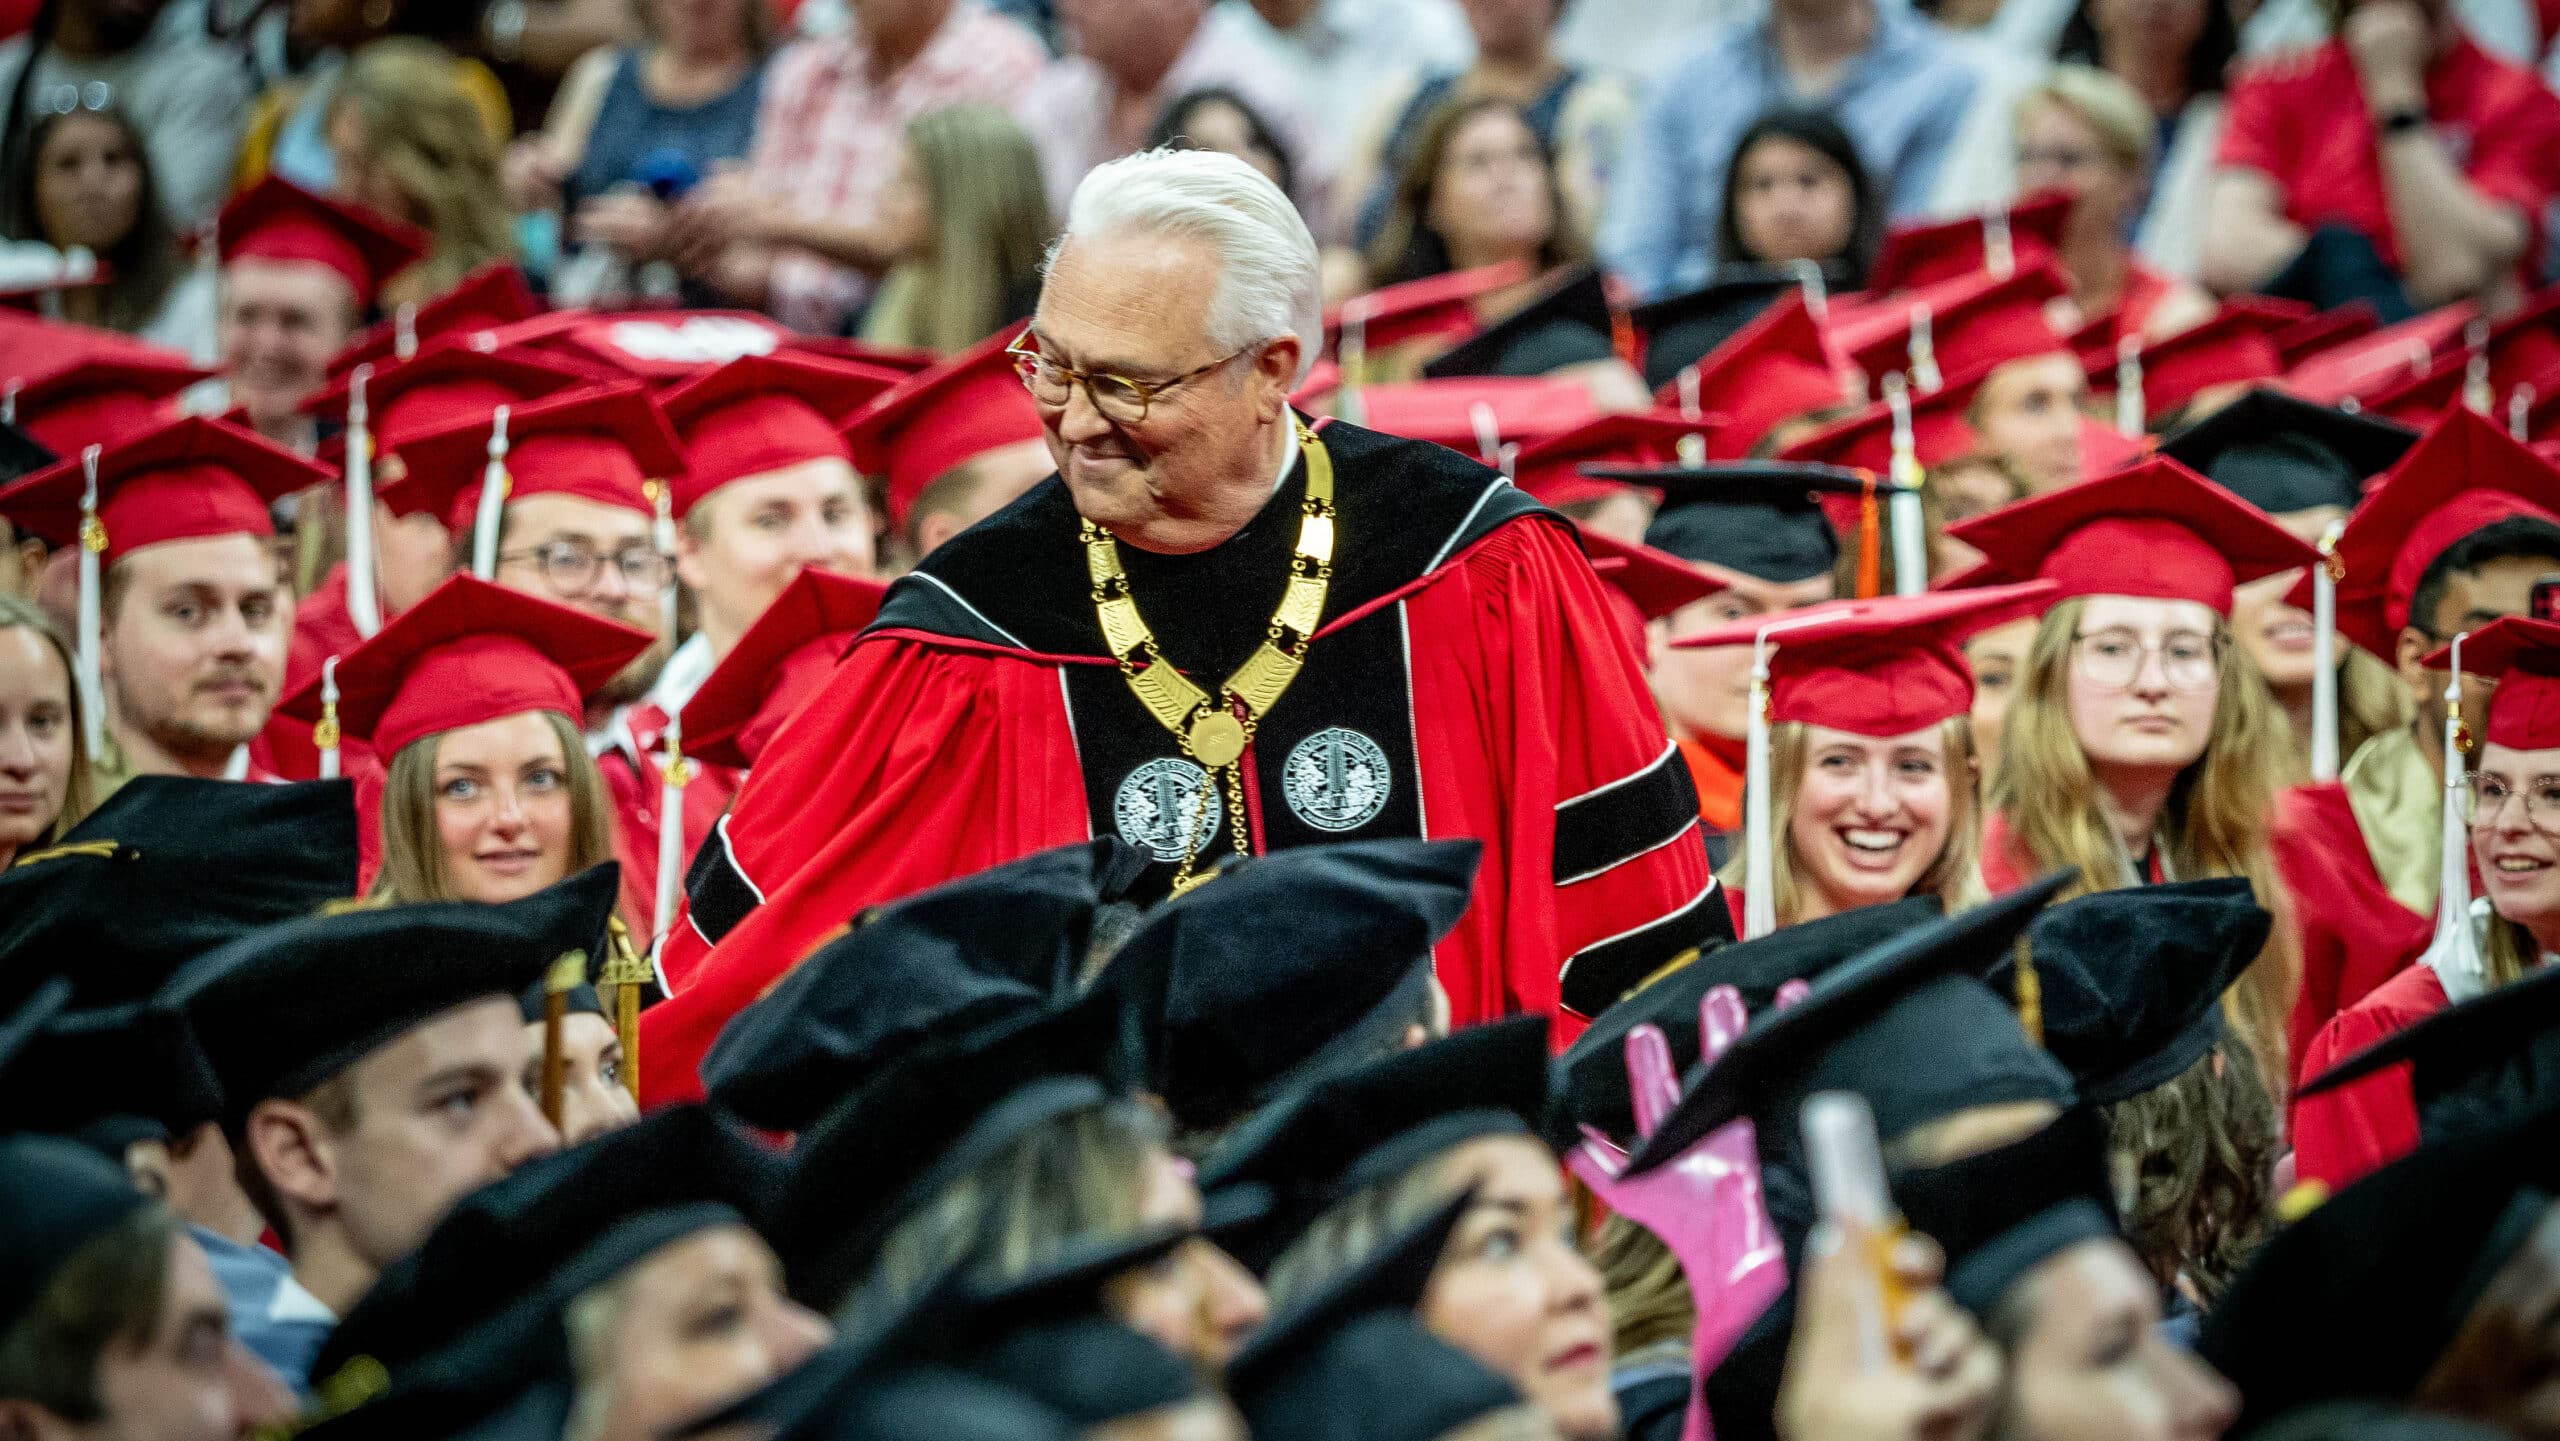 Chancellor Woodson with Students at Graduation